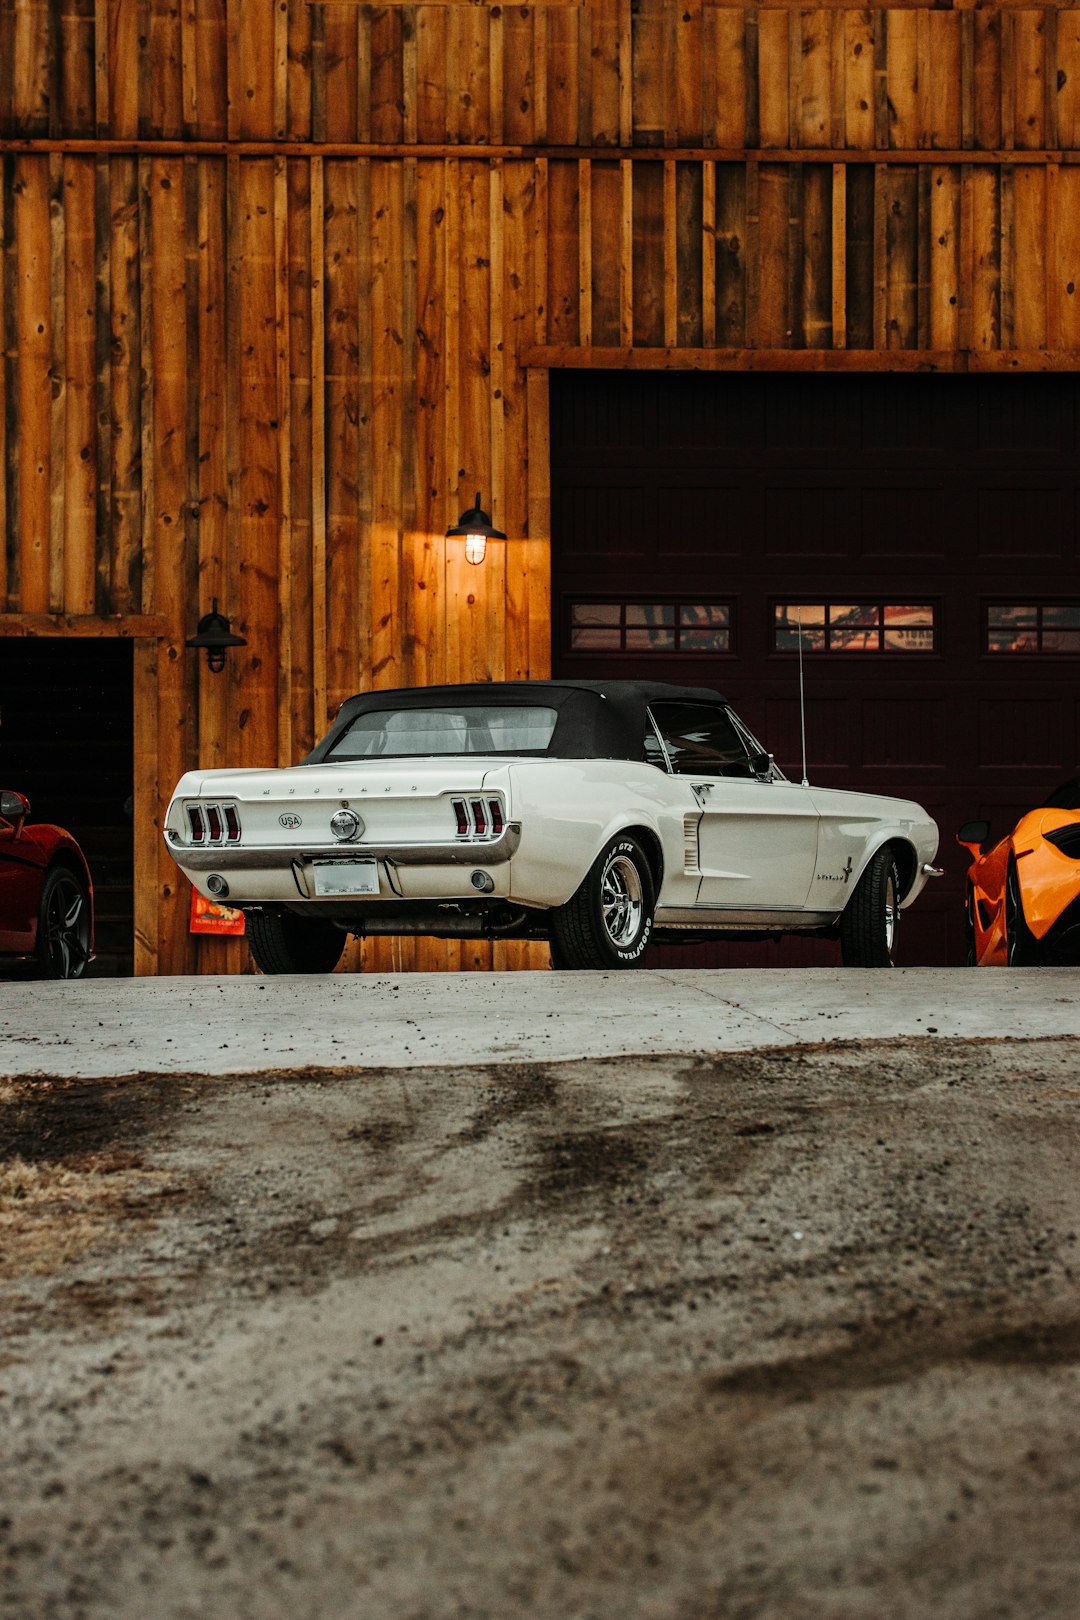 white chevrolet camaro parked beside brown wooden wall